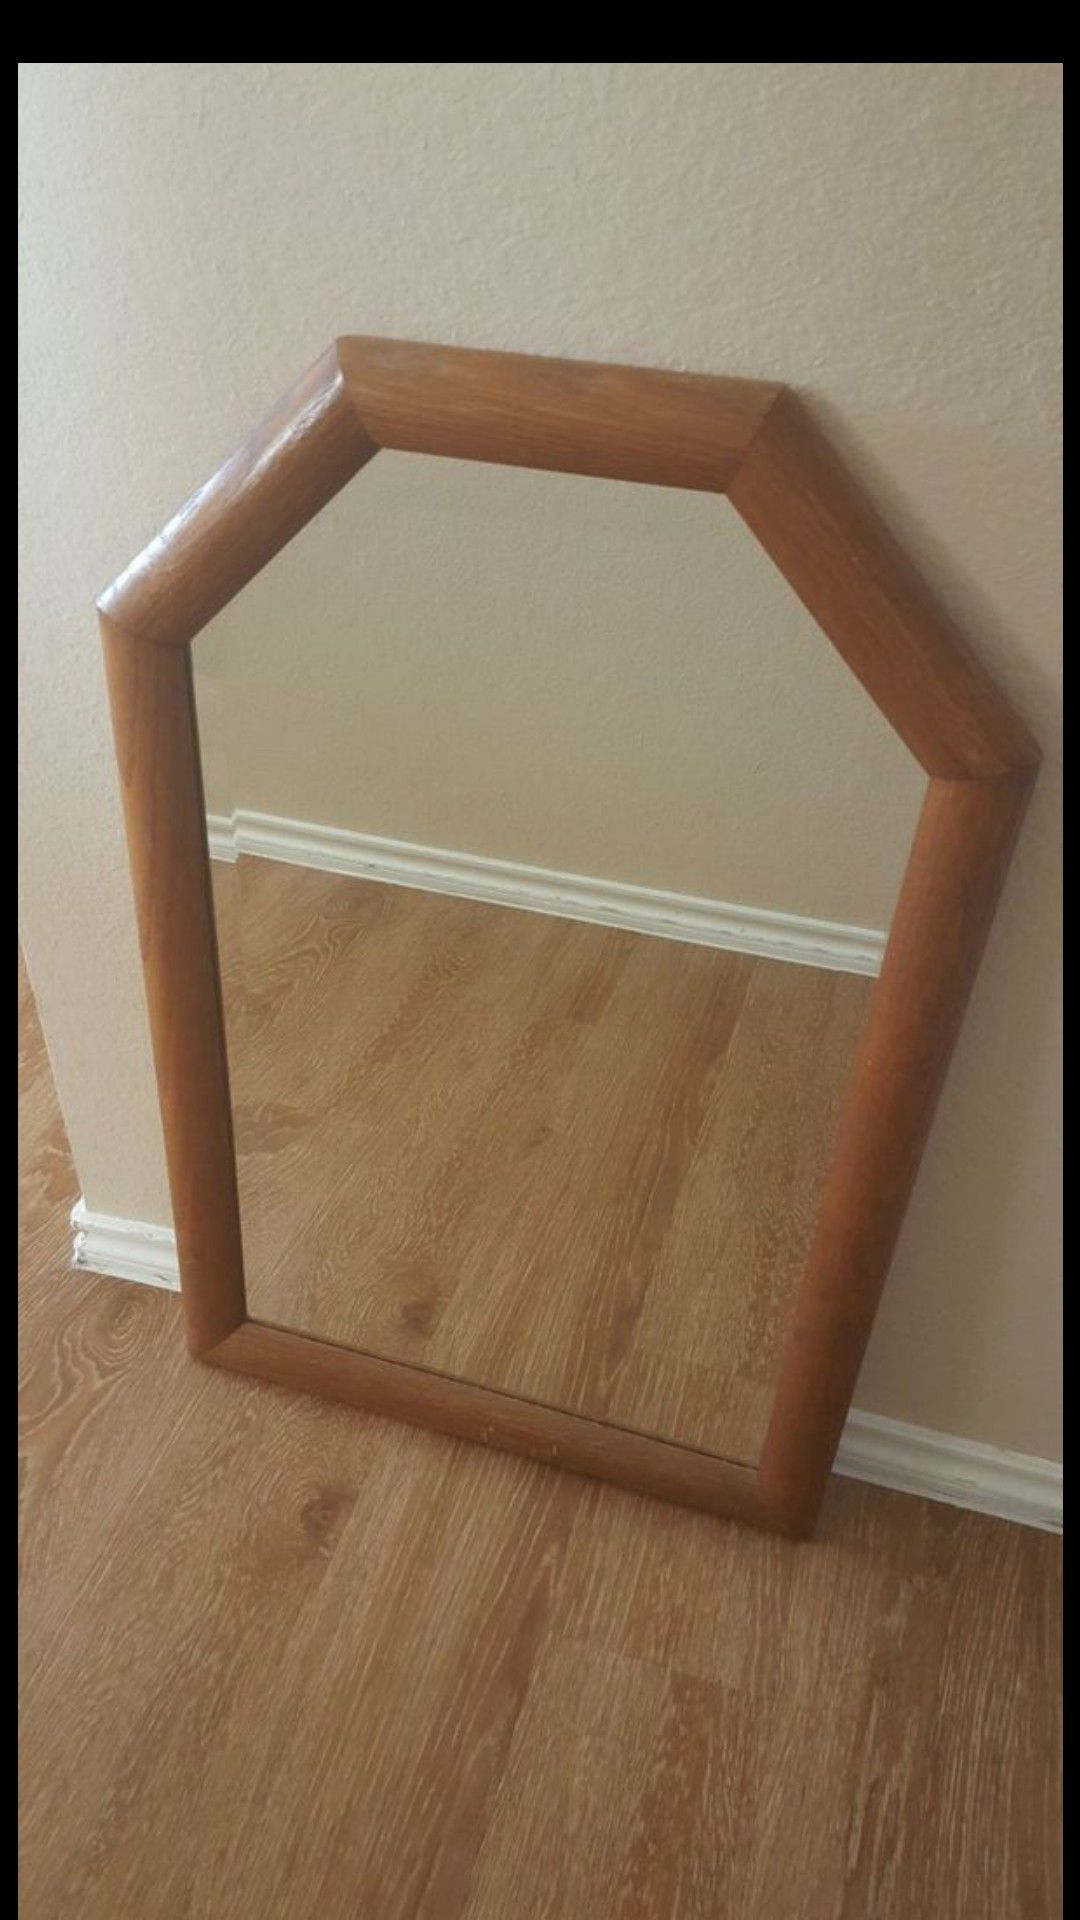 Very heavy Lovely Vintage solid wood framed Beveled Glass Octagonal Rectangular Wall Mirror ( 29.5"H x 19.25"W ) - FIRM PRICE